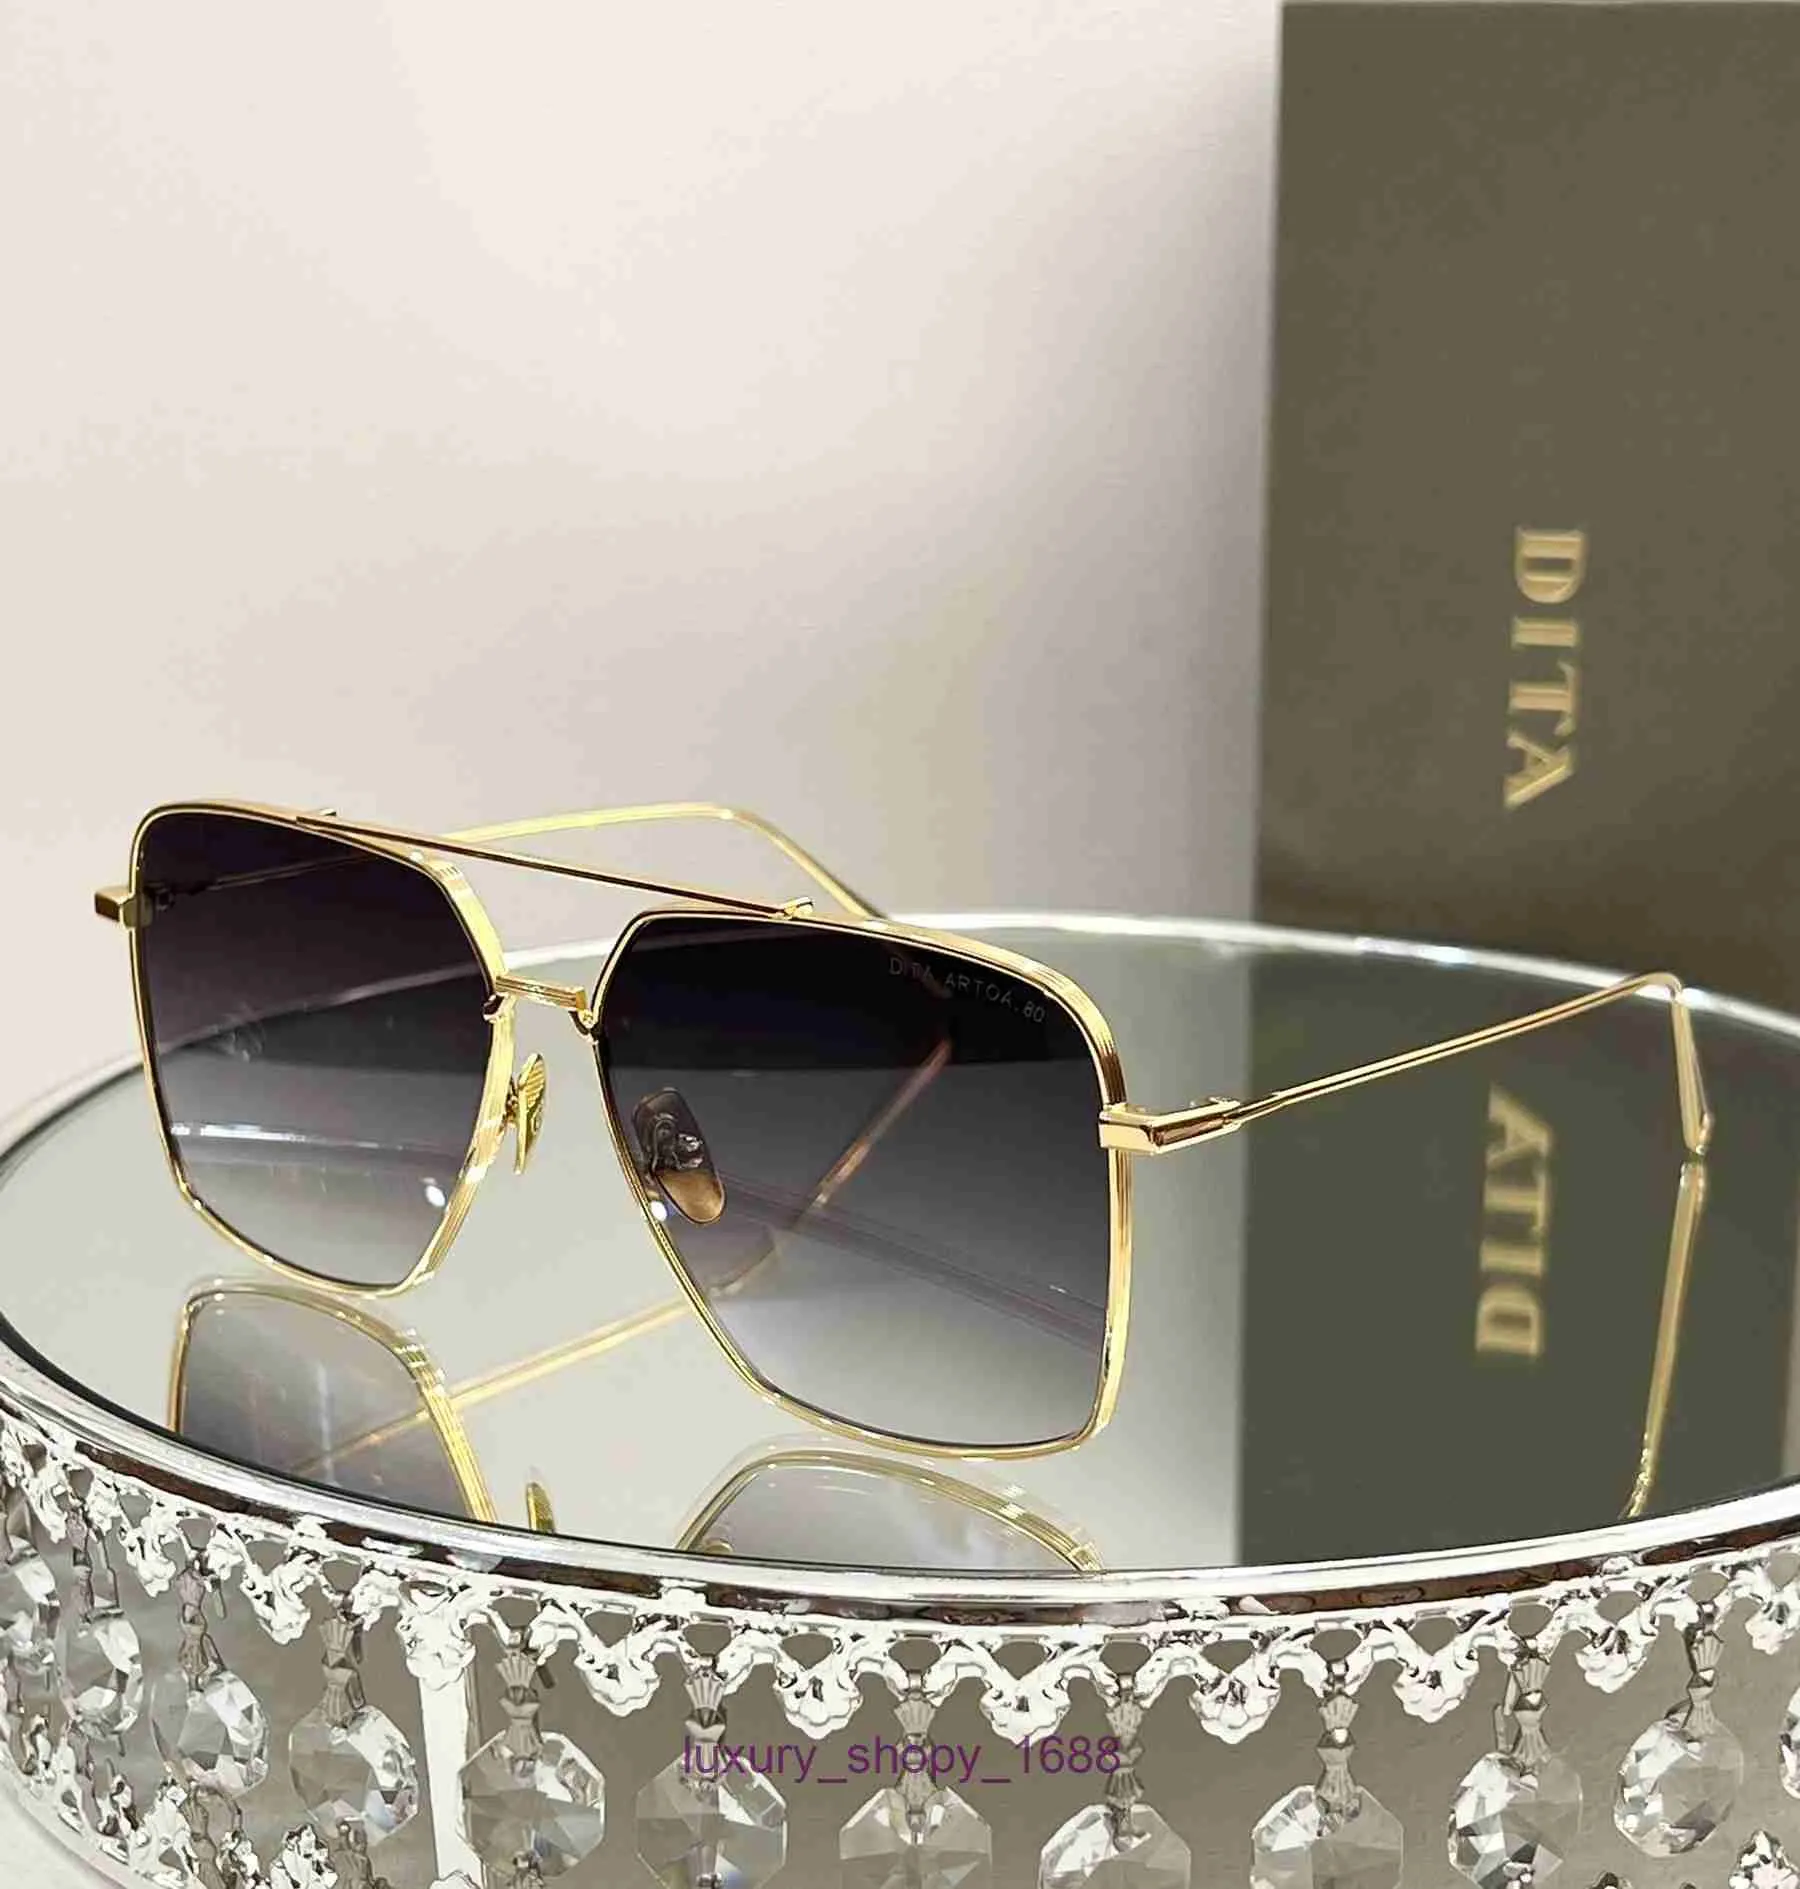 Designer Fashion sunglasses for women and men online store DITA top quality ARTOA.80 series metal with iconic logo Have gift box Y8MH